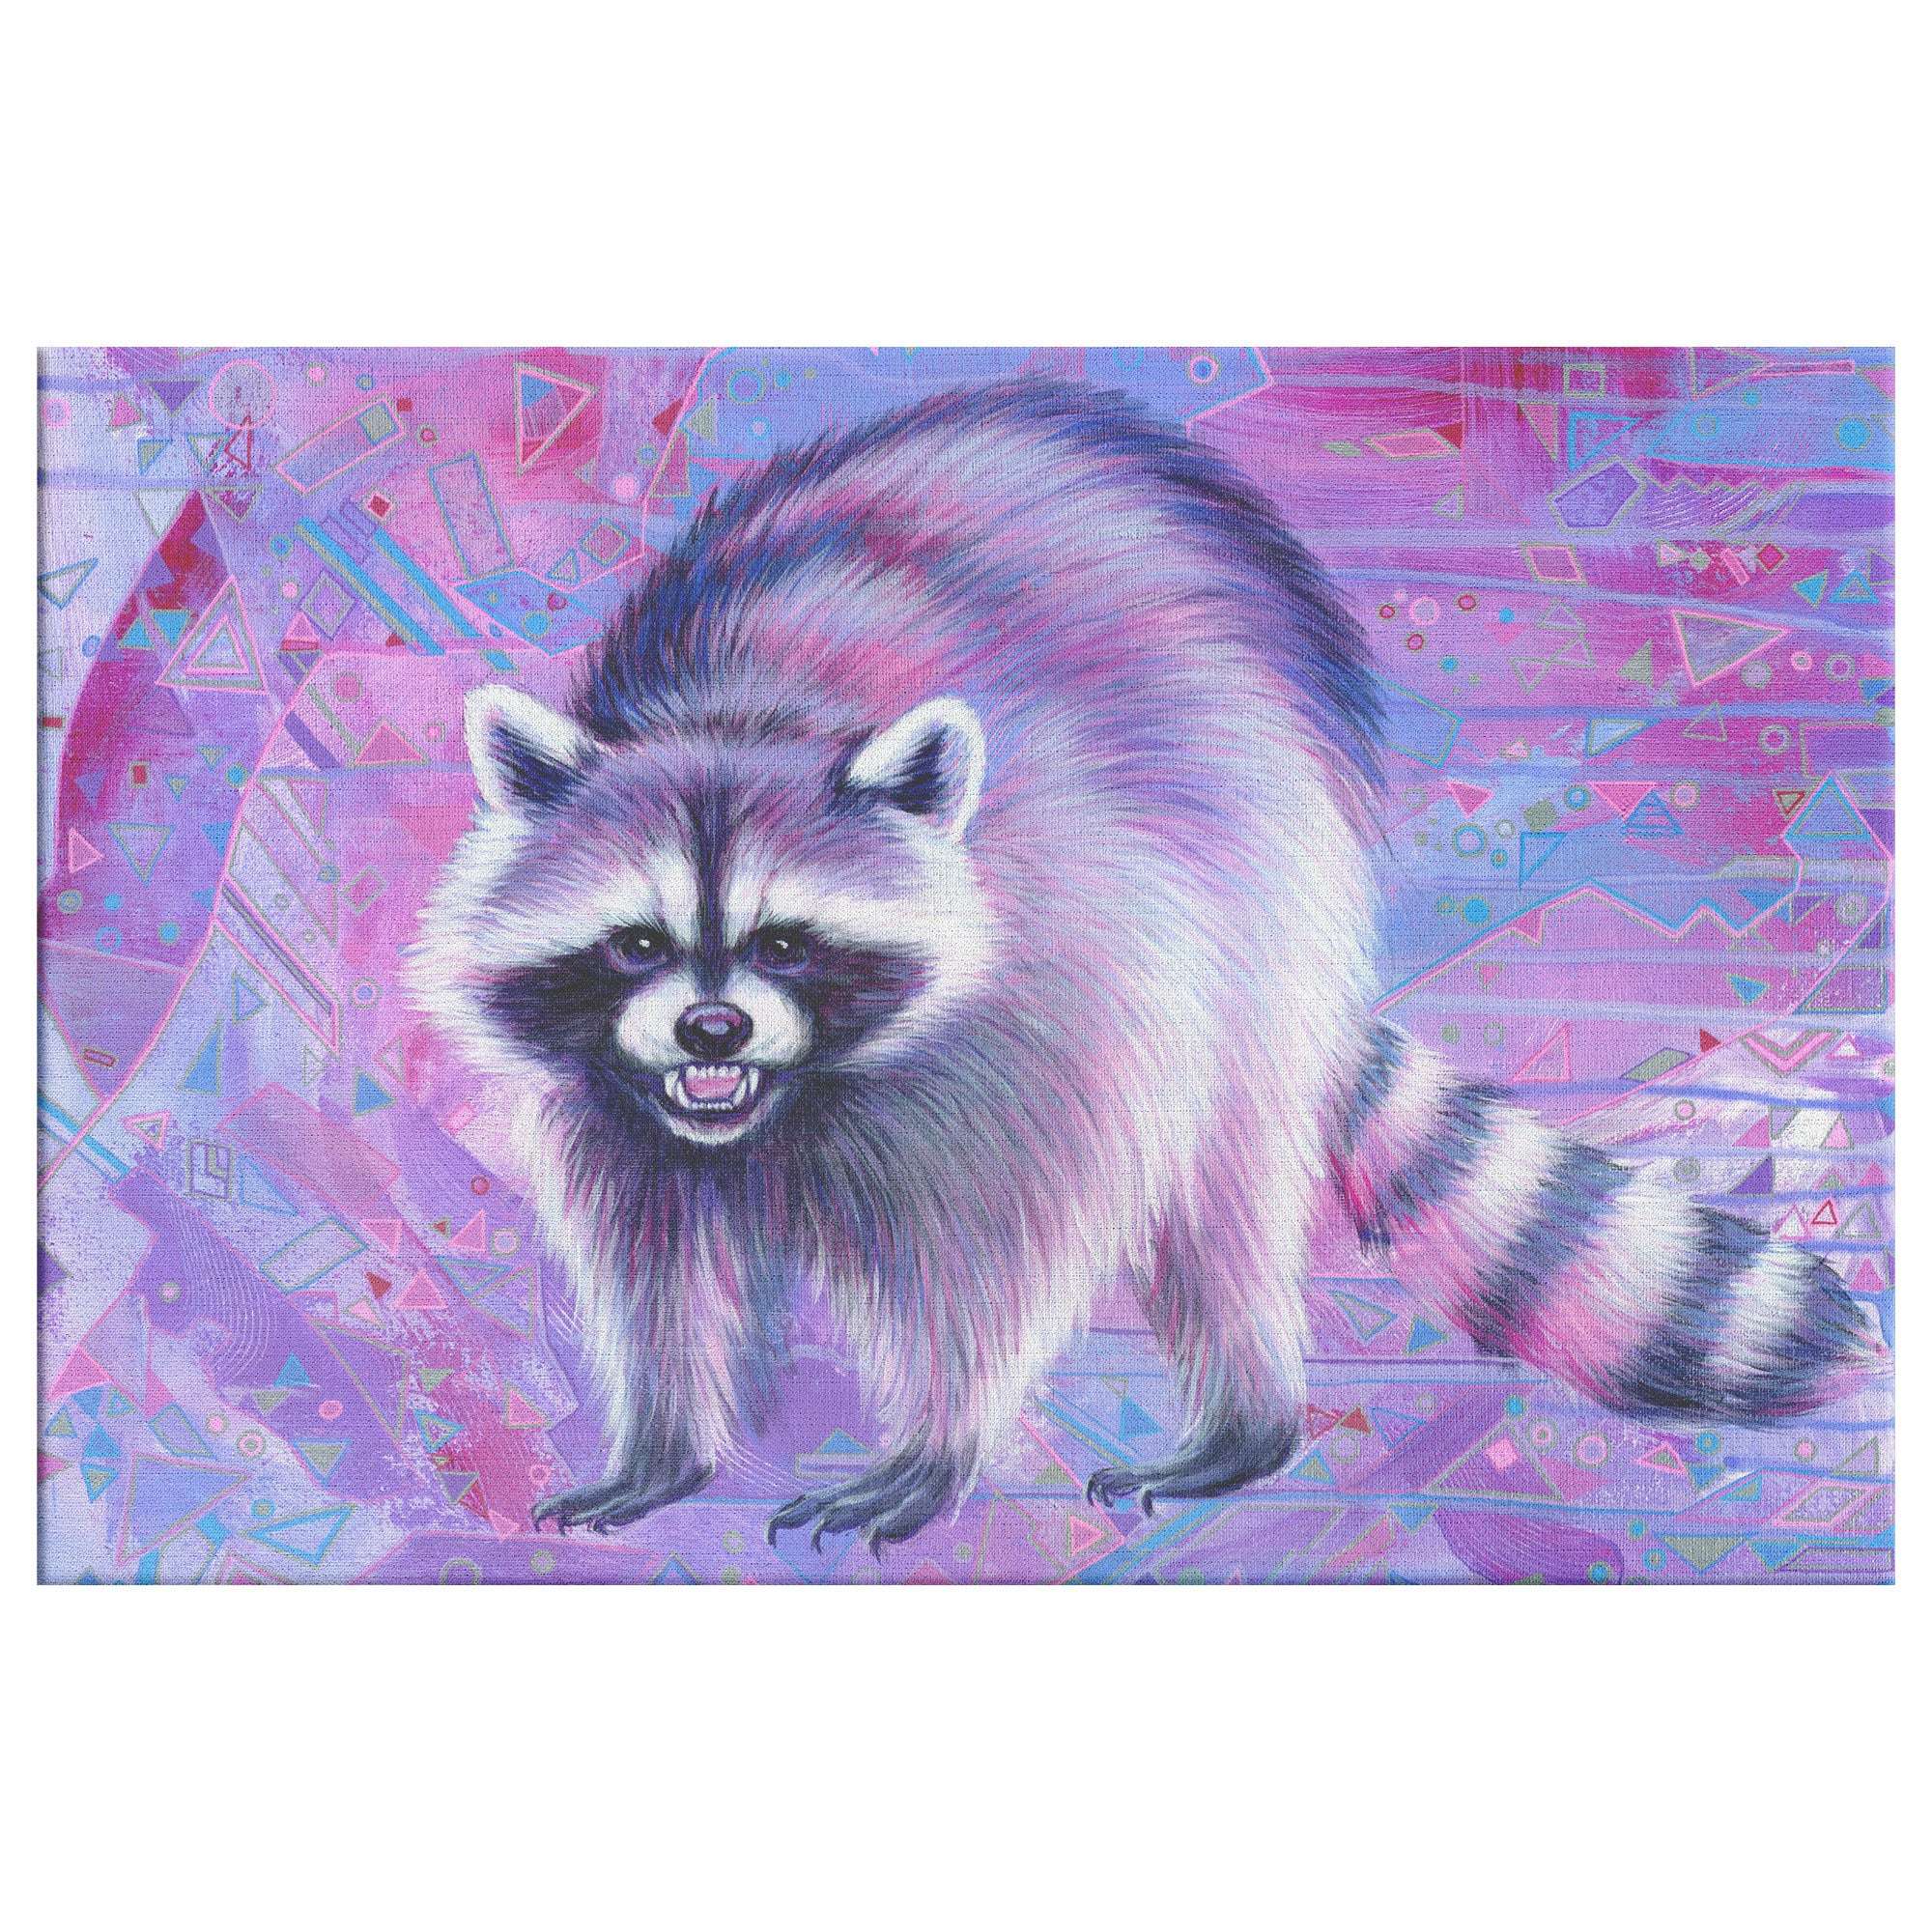 A Canvas Raccoon Print featuring a colorful illustration of a raccoon on a vibrant, purple-toned abstract geometric background.